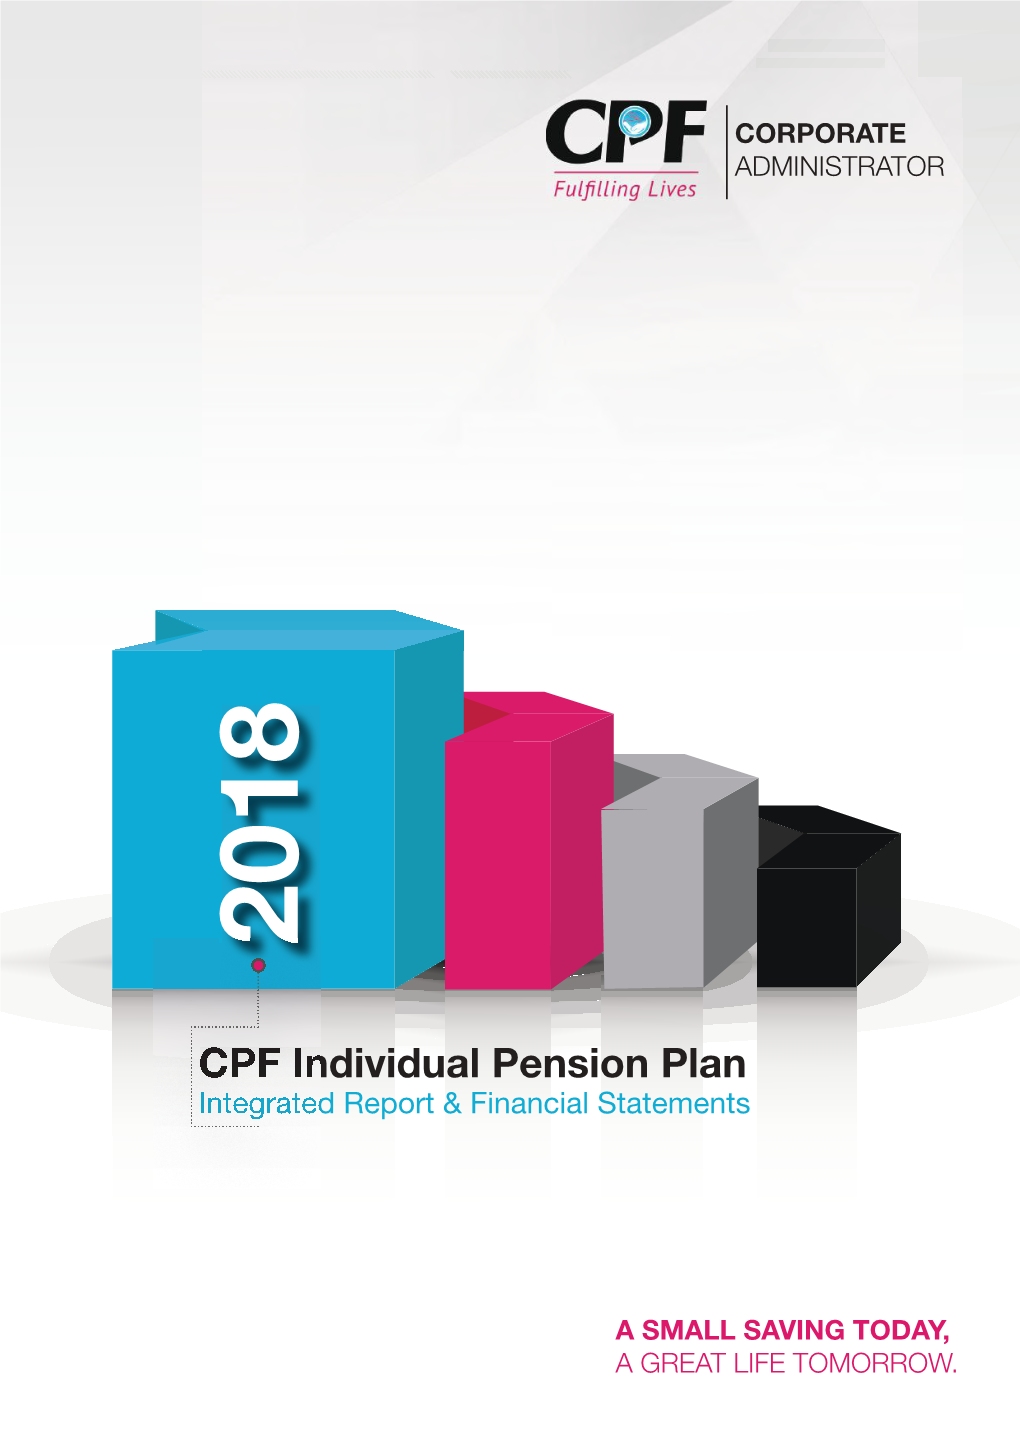 CPF Individual Pension Plan Integrated Report & Financial Statements